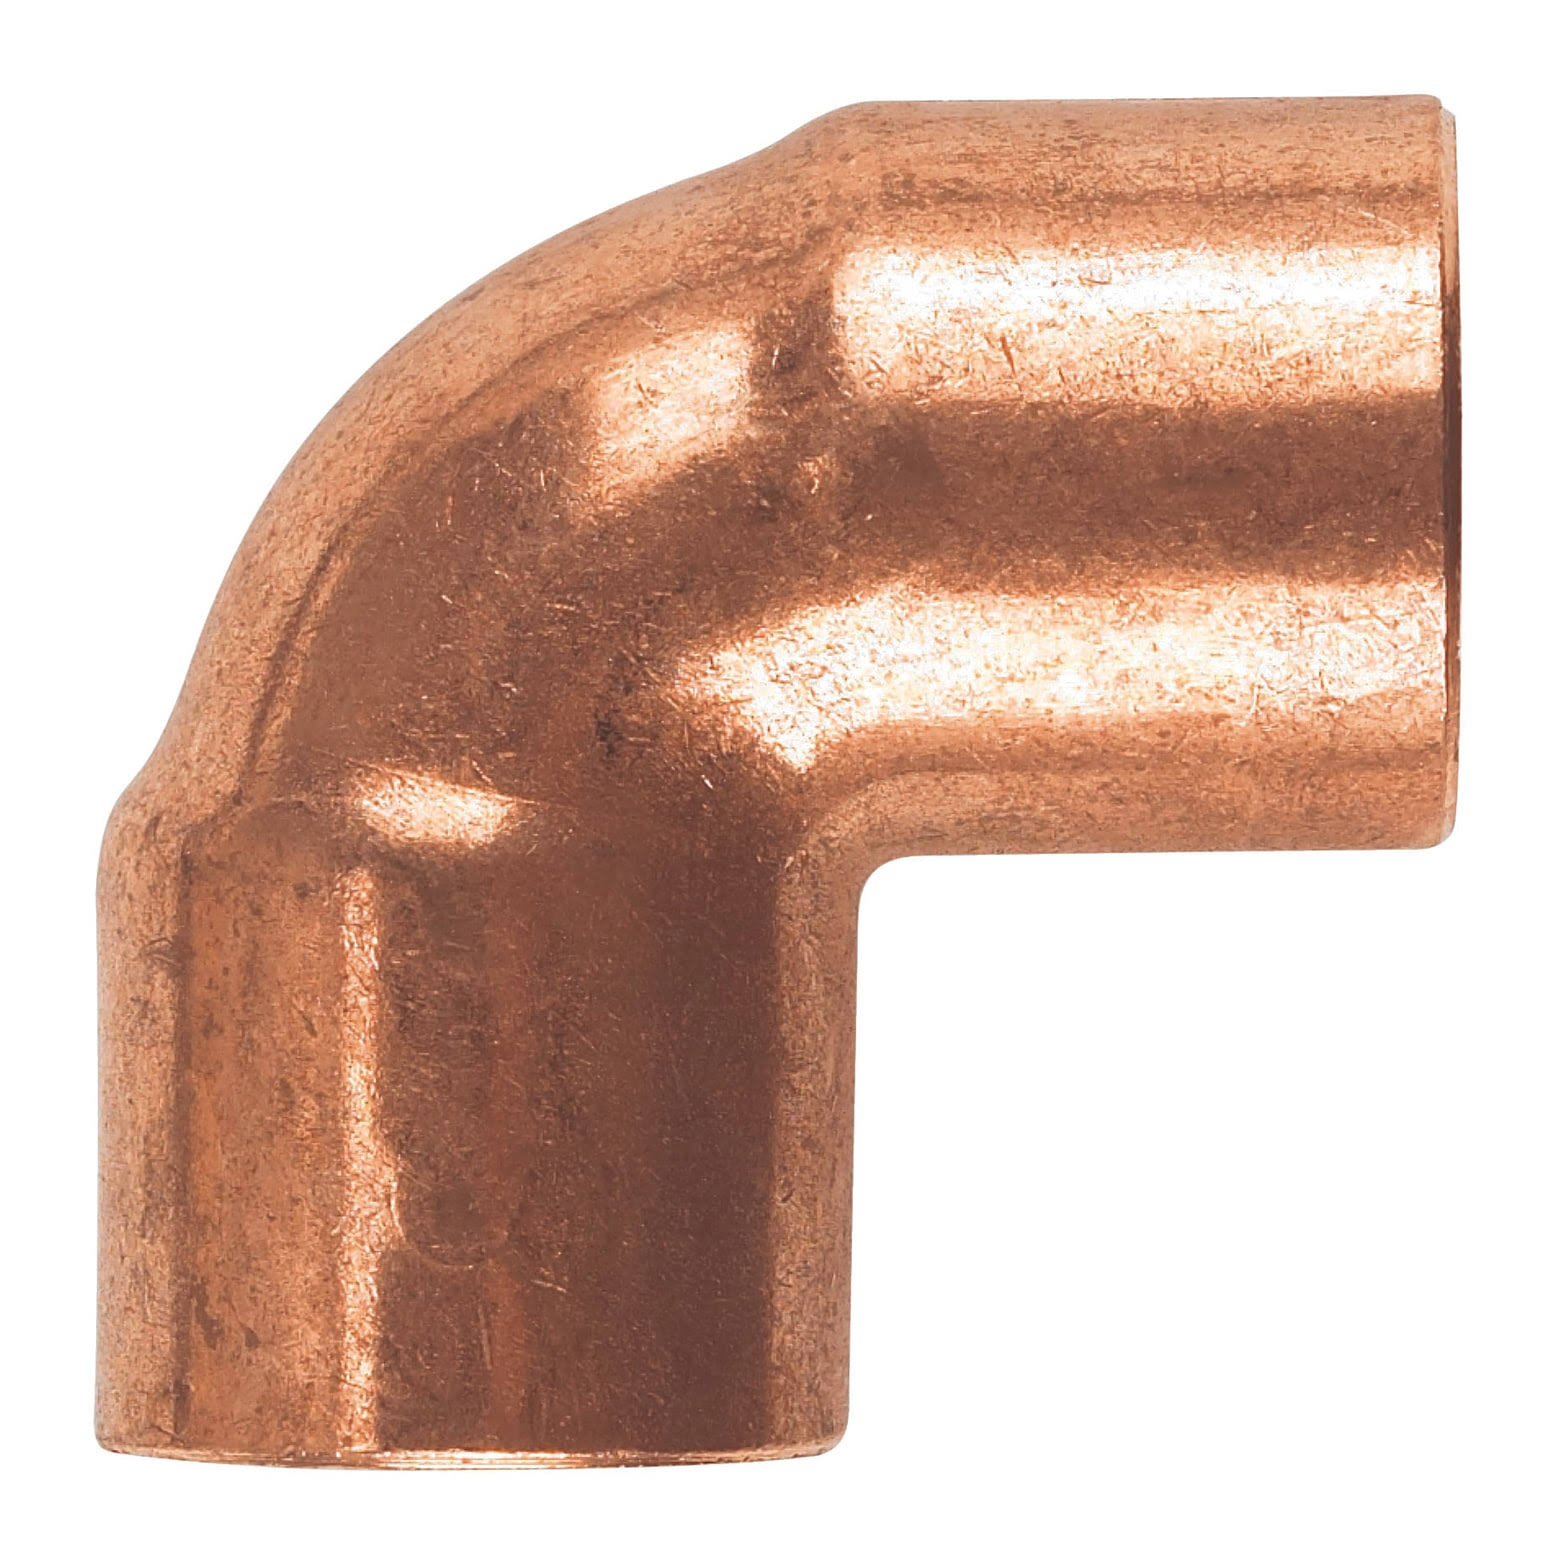 Elkhart Products 90 Degree Copper Elbow - 3/4"